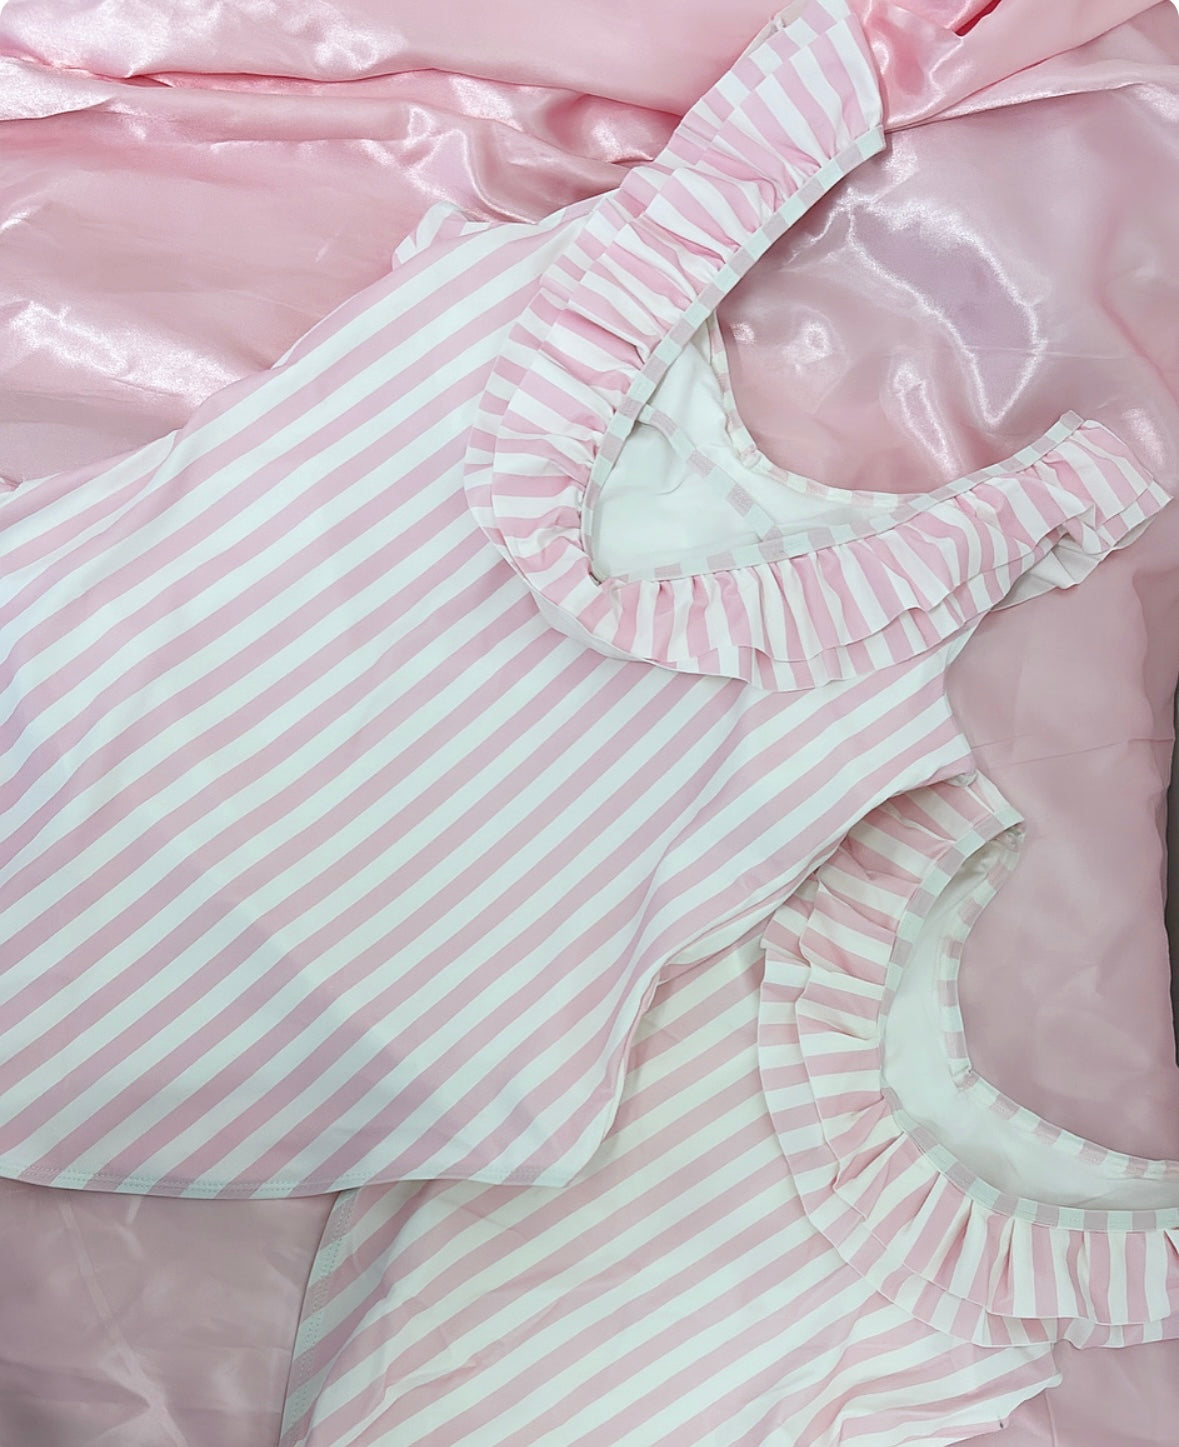 WOMENS PERSONALISED PINK STRIPED SWIMMING COSTUME 2-4 WEEKS